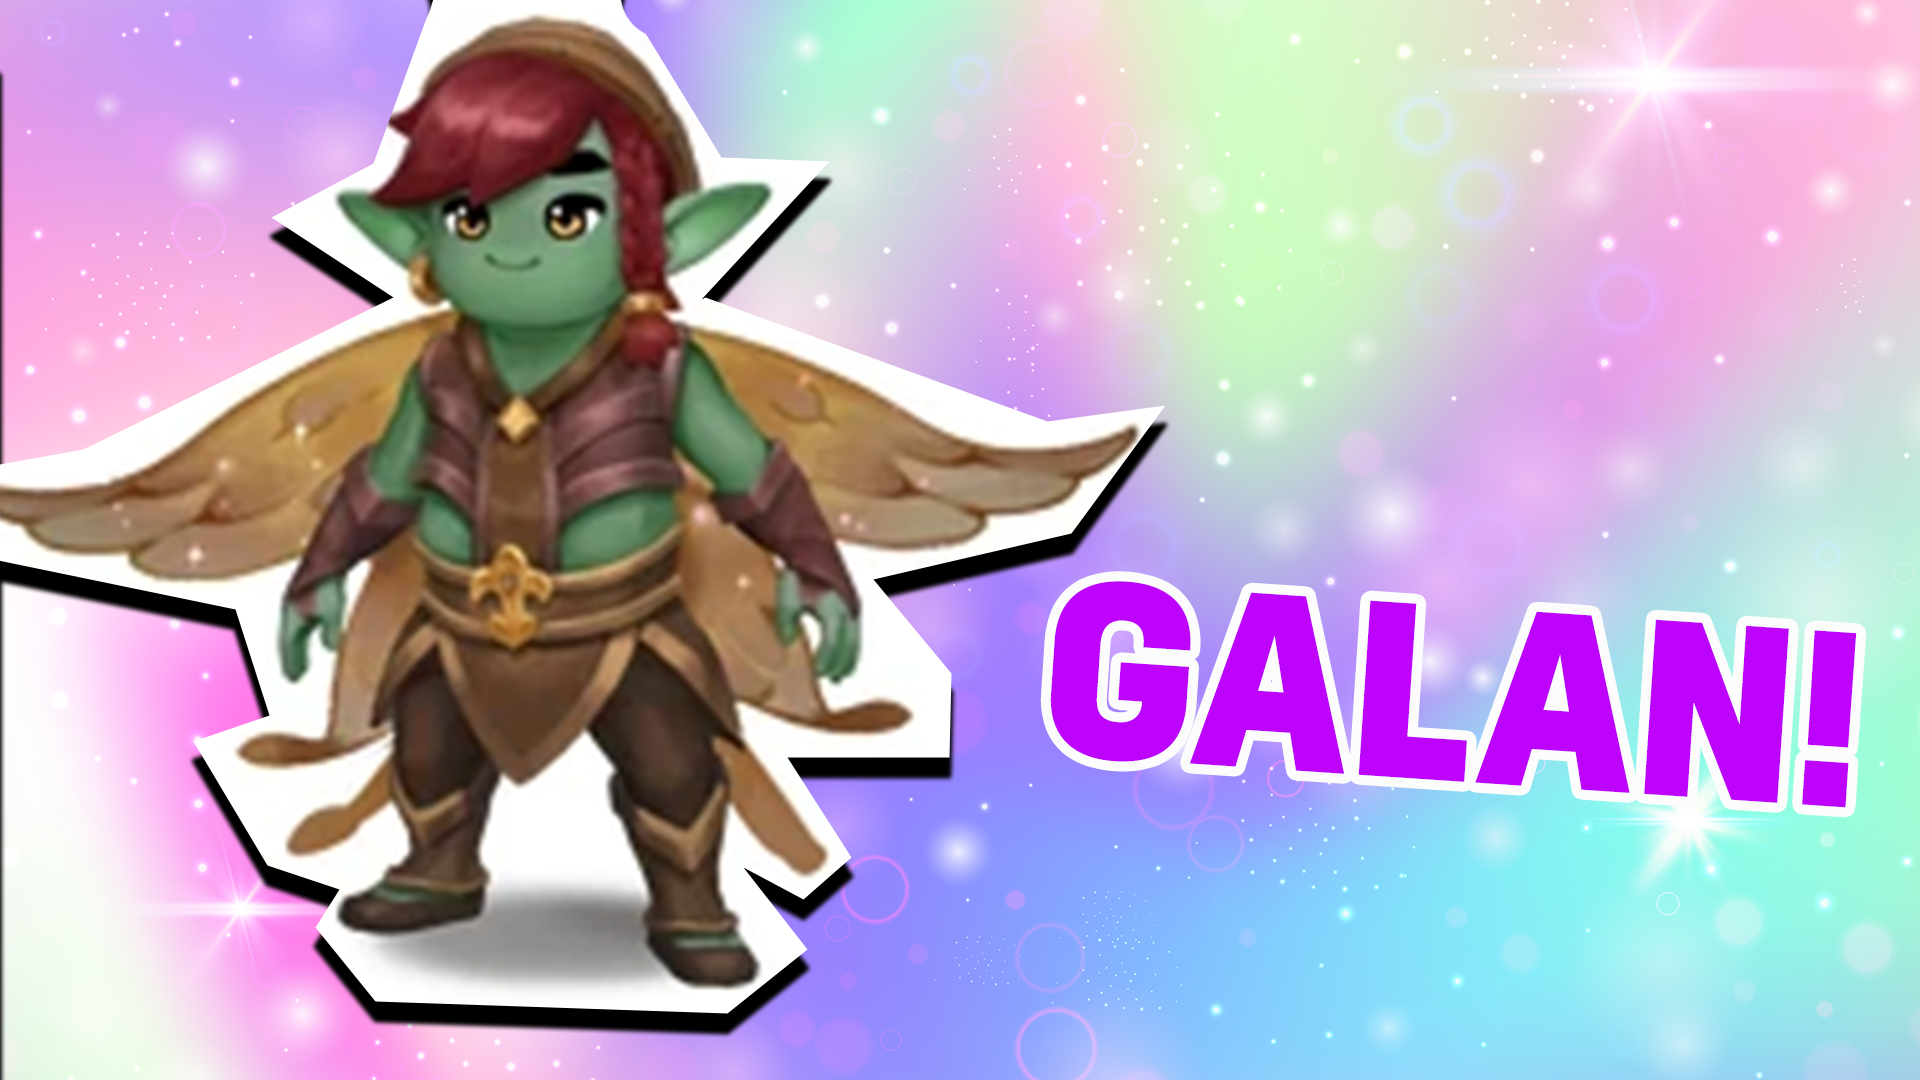 You're Galan! You're a natural born storyteller and you share a love of food with your friends! You also love travelling and meeting new people!